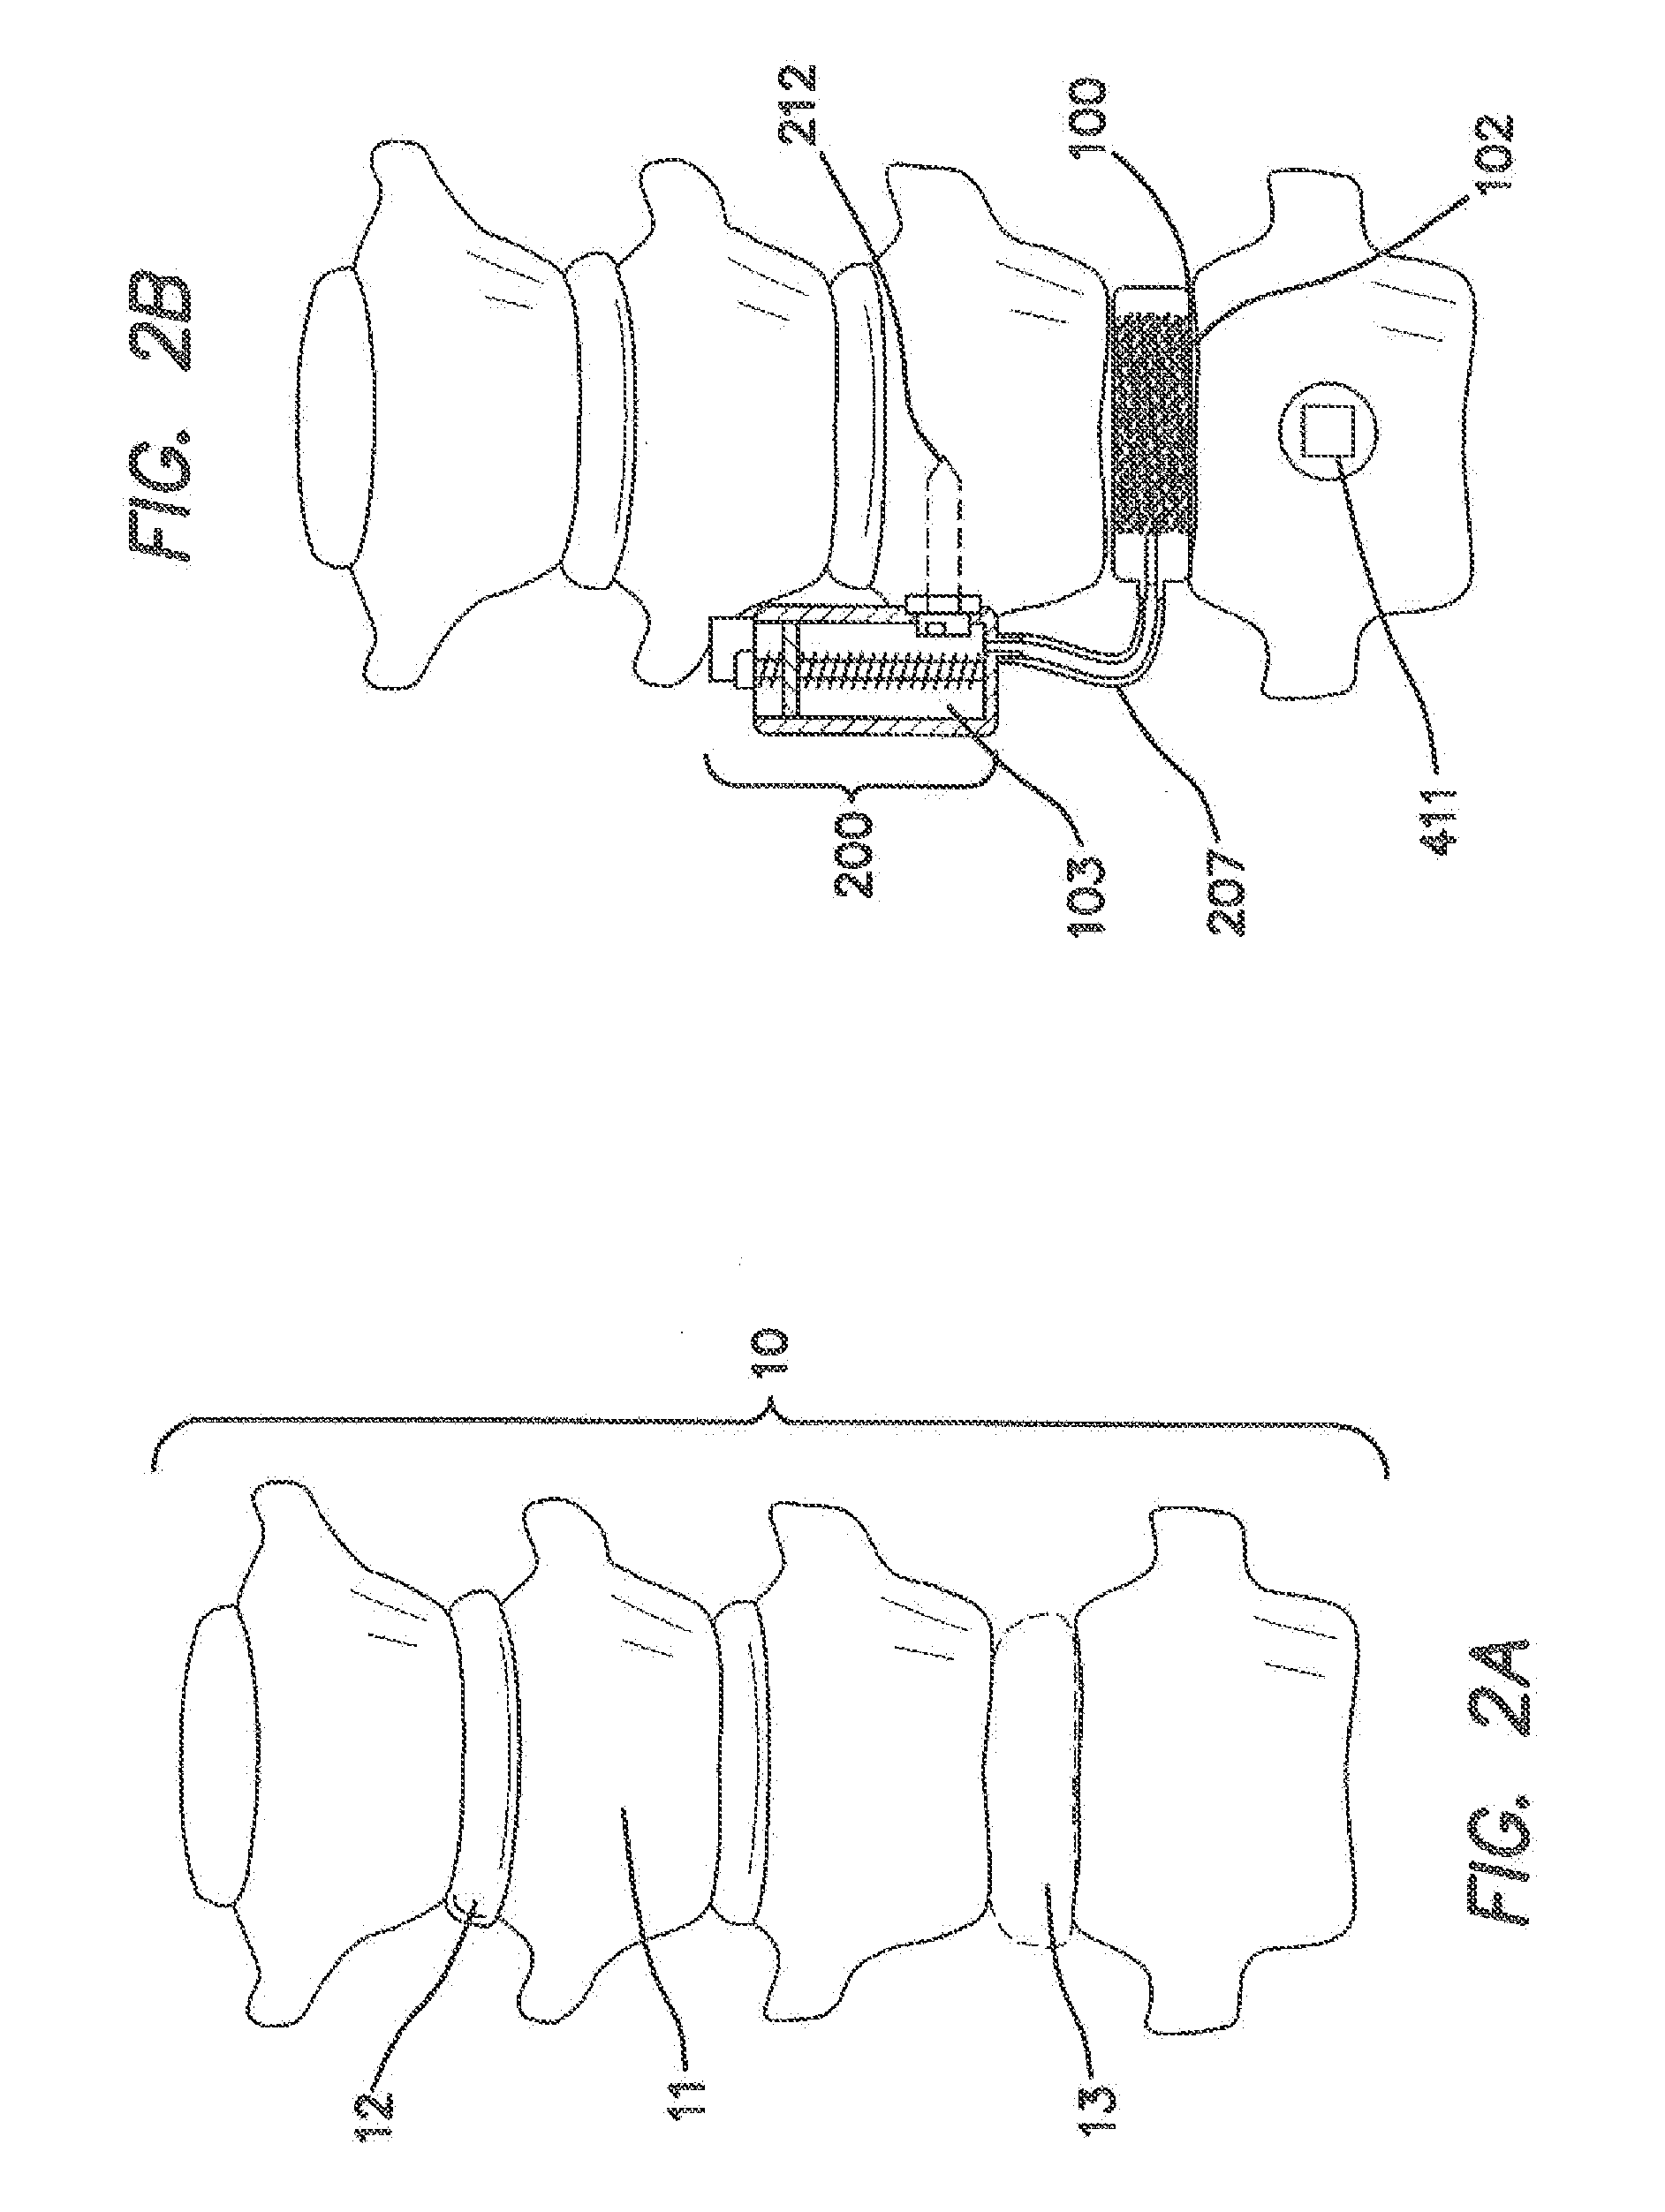 Remotely Activated Piezoelectric Pump for Delivery of Biological Agents to the Intervertebral Disc and Spine